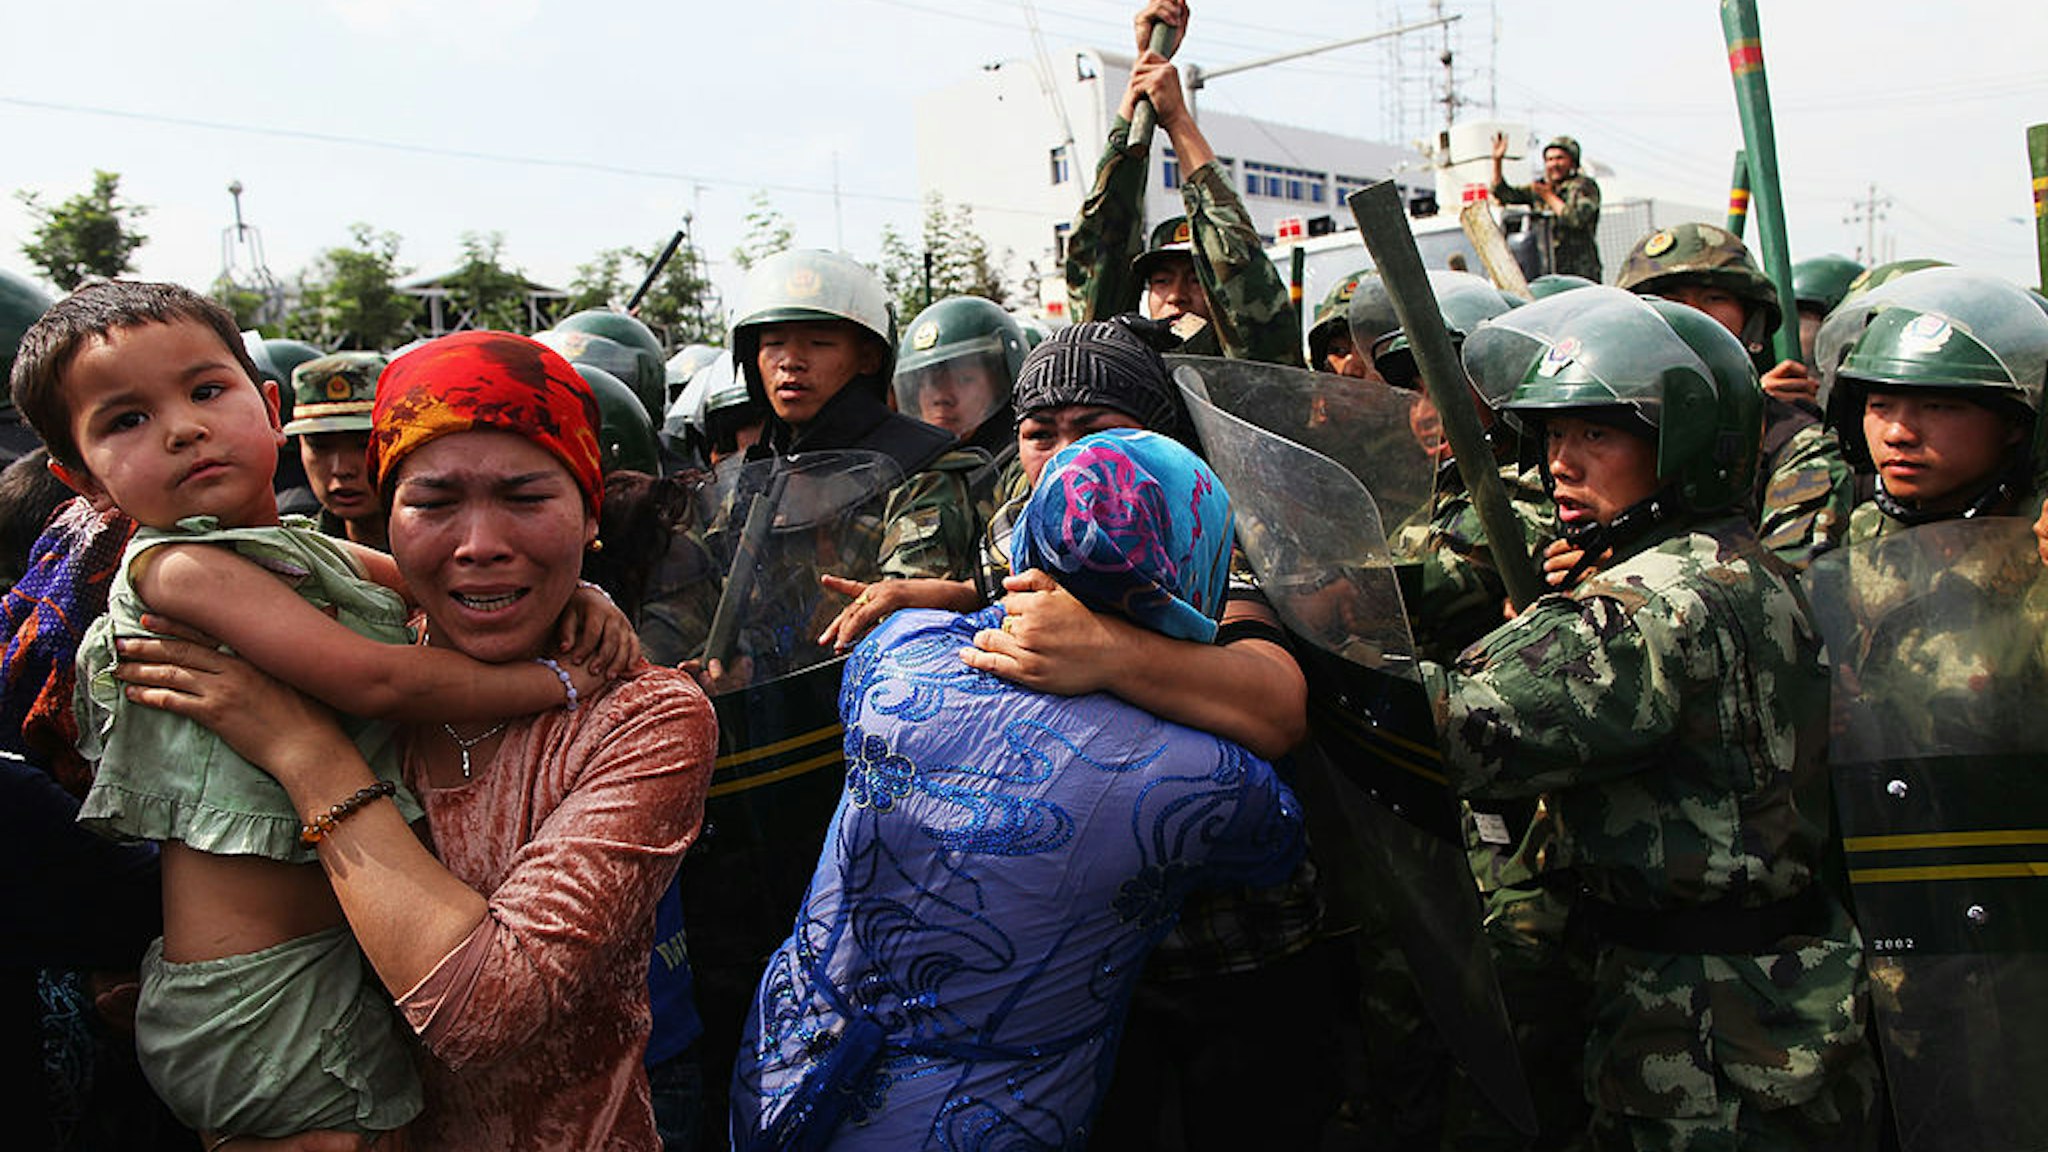 URUMQI, CHINA - JULY 07: Chinese policemen push Uighur women who are protesting at a street on July 7, 2009 in Urumqi, the capital of Xinjiang Uighur autonomous region, China. Hundreds of Uighur people have taken to the streets protesting after their relatives were detained by authorities after Sunday's protest. Ethnic riots in the capital of the Muslim Xinjiang region on Sunday saw 156 people killed. Police officers, soldiers and firefighters were dispatched to contain the rioting with hundreds of people being detained. (Photo by Guang Niu/Getty Images)